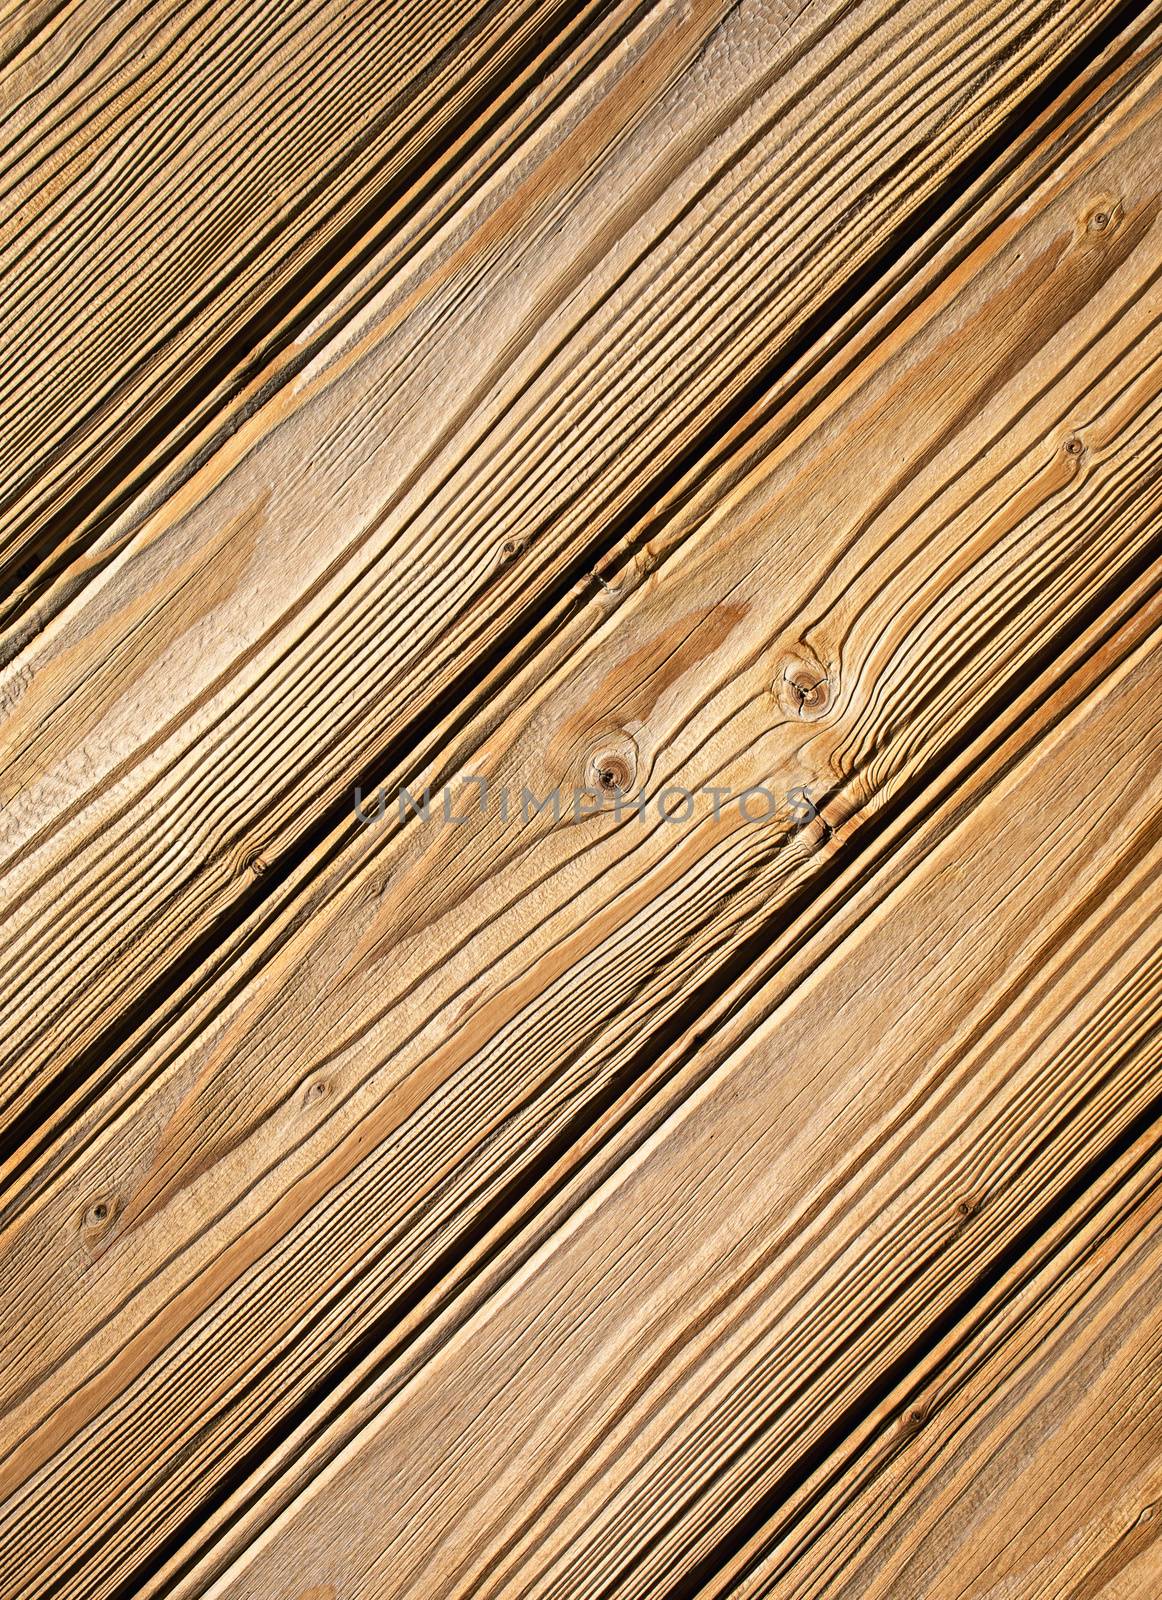 background or texture detail on wooden siding with grooved boards